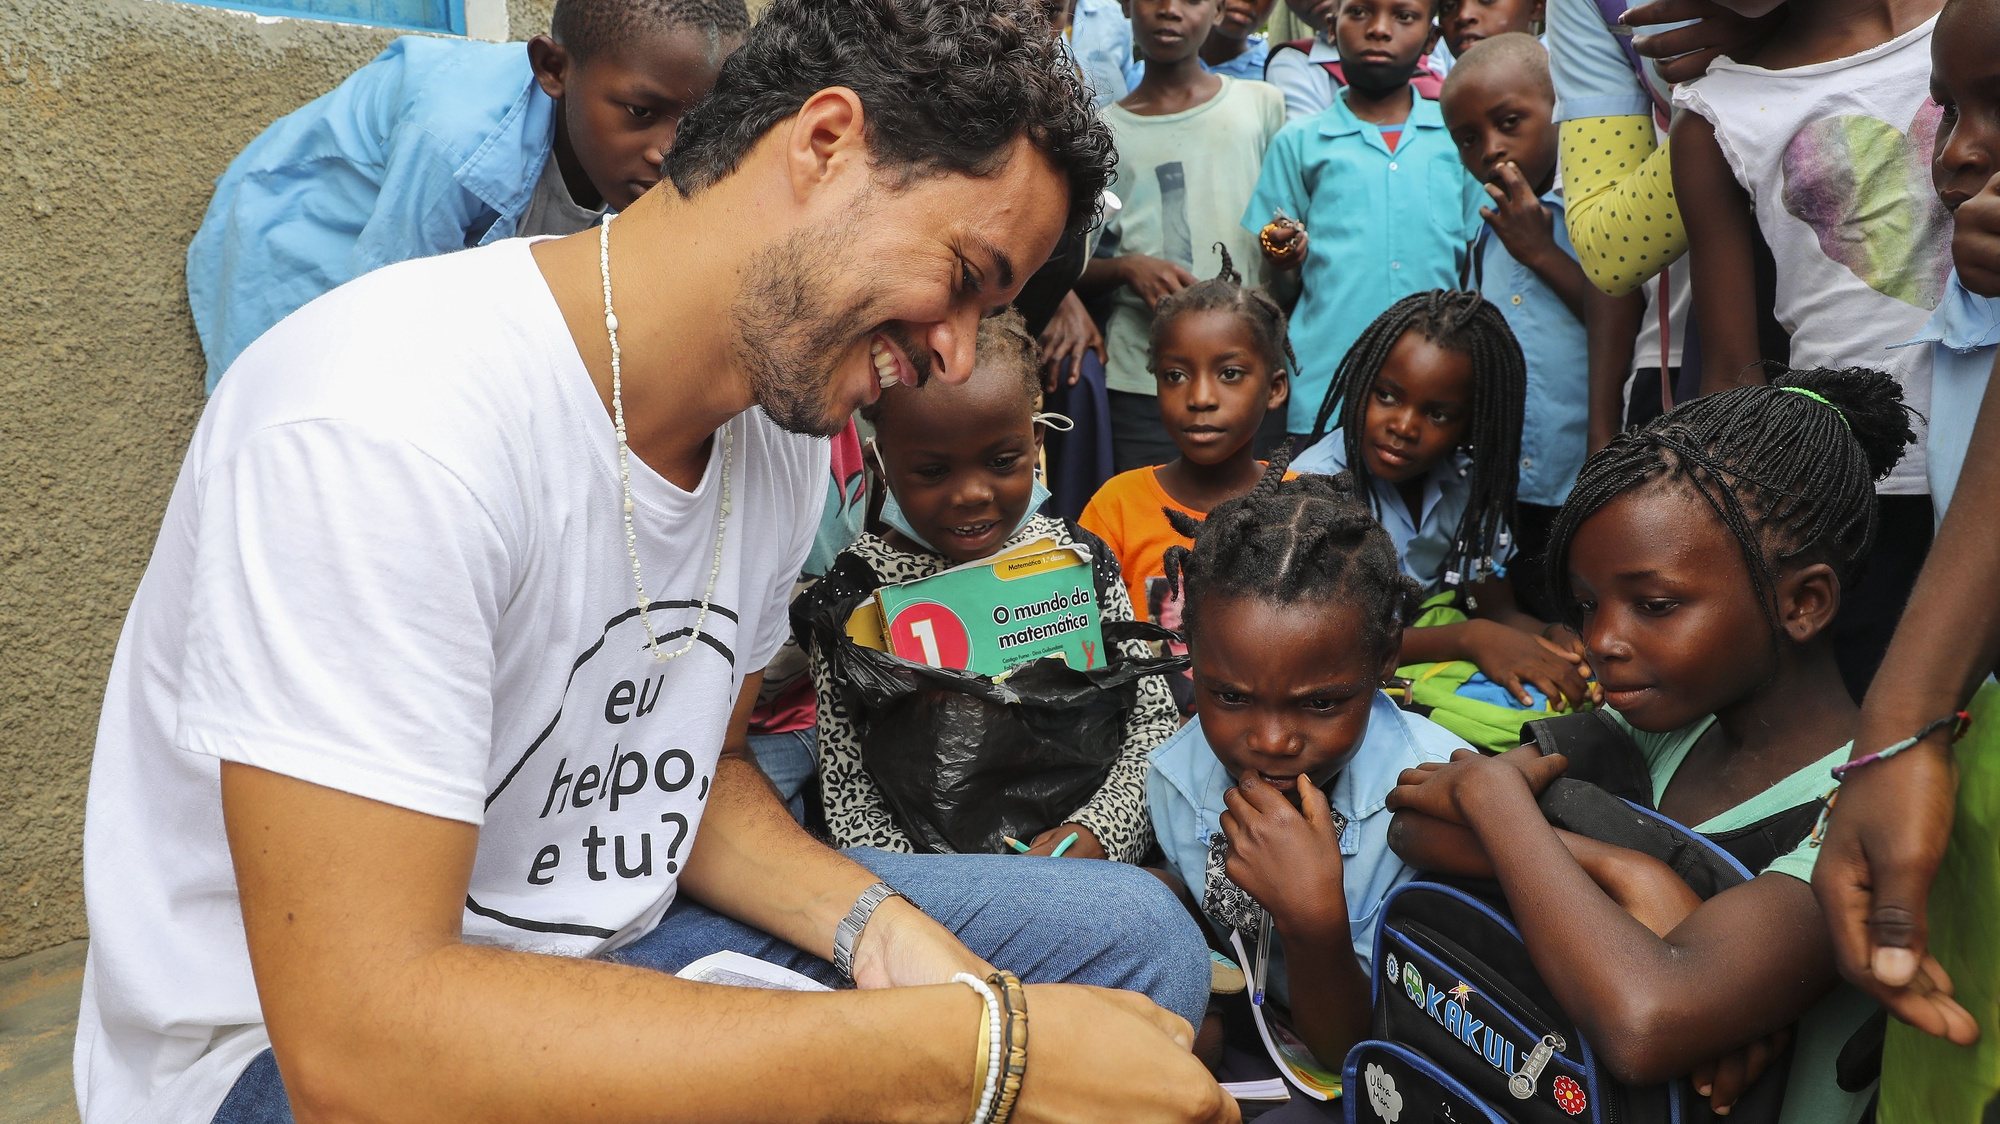 Leandro Martins, 31 years old Brazilian and Karibu project manager, talks to some of the students during the break. The NGO Helpo, through the Karibu project, supports 500 displaced students from the 2000s who are studying at the primary school in the Mahate neighborhood, in Pemba, Cabo Delgado province, April 14, 2021. The violence unleashed more than three years ago in Cabo Delgado province escalated again about two weeks ago, when armed groups first attacked the town of Palma, forcing people to flee from a conflict zone. JOAO RELVAS/LUSA